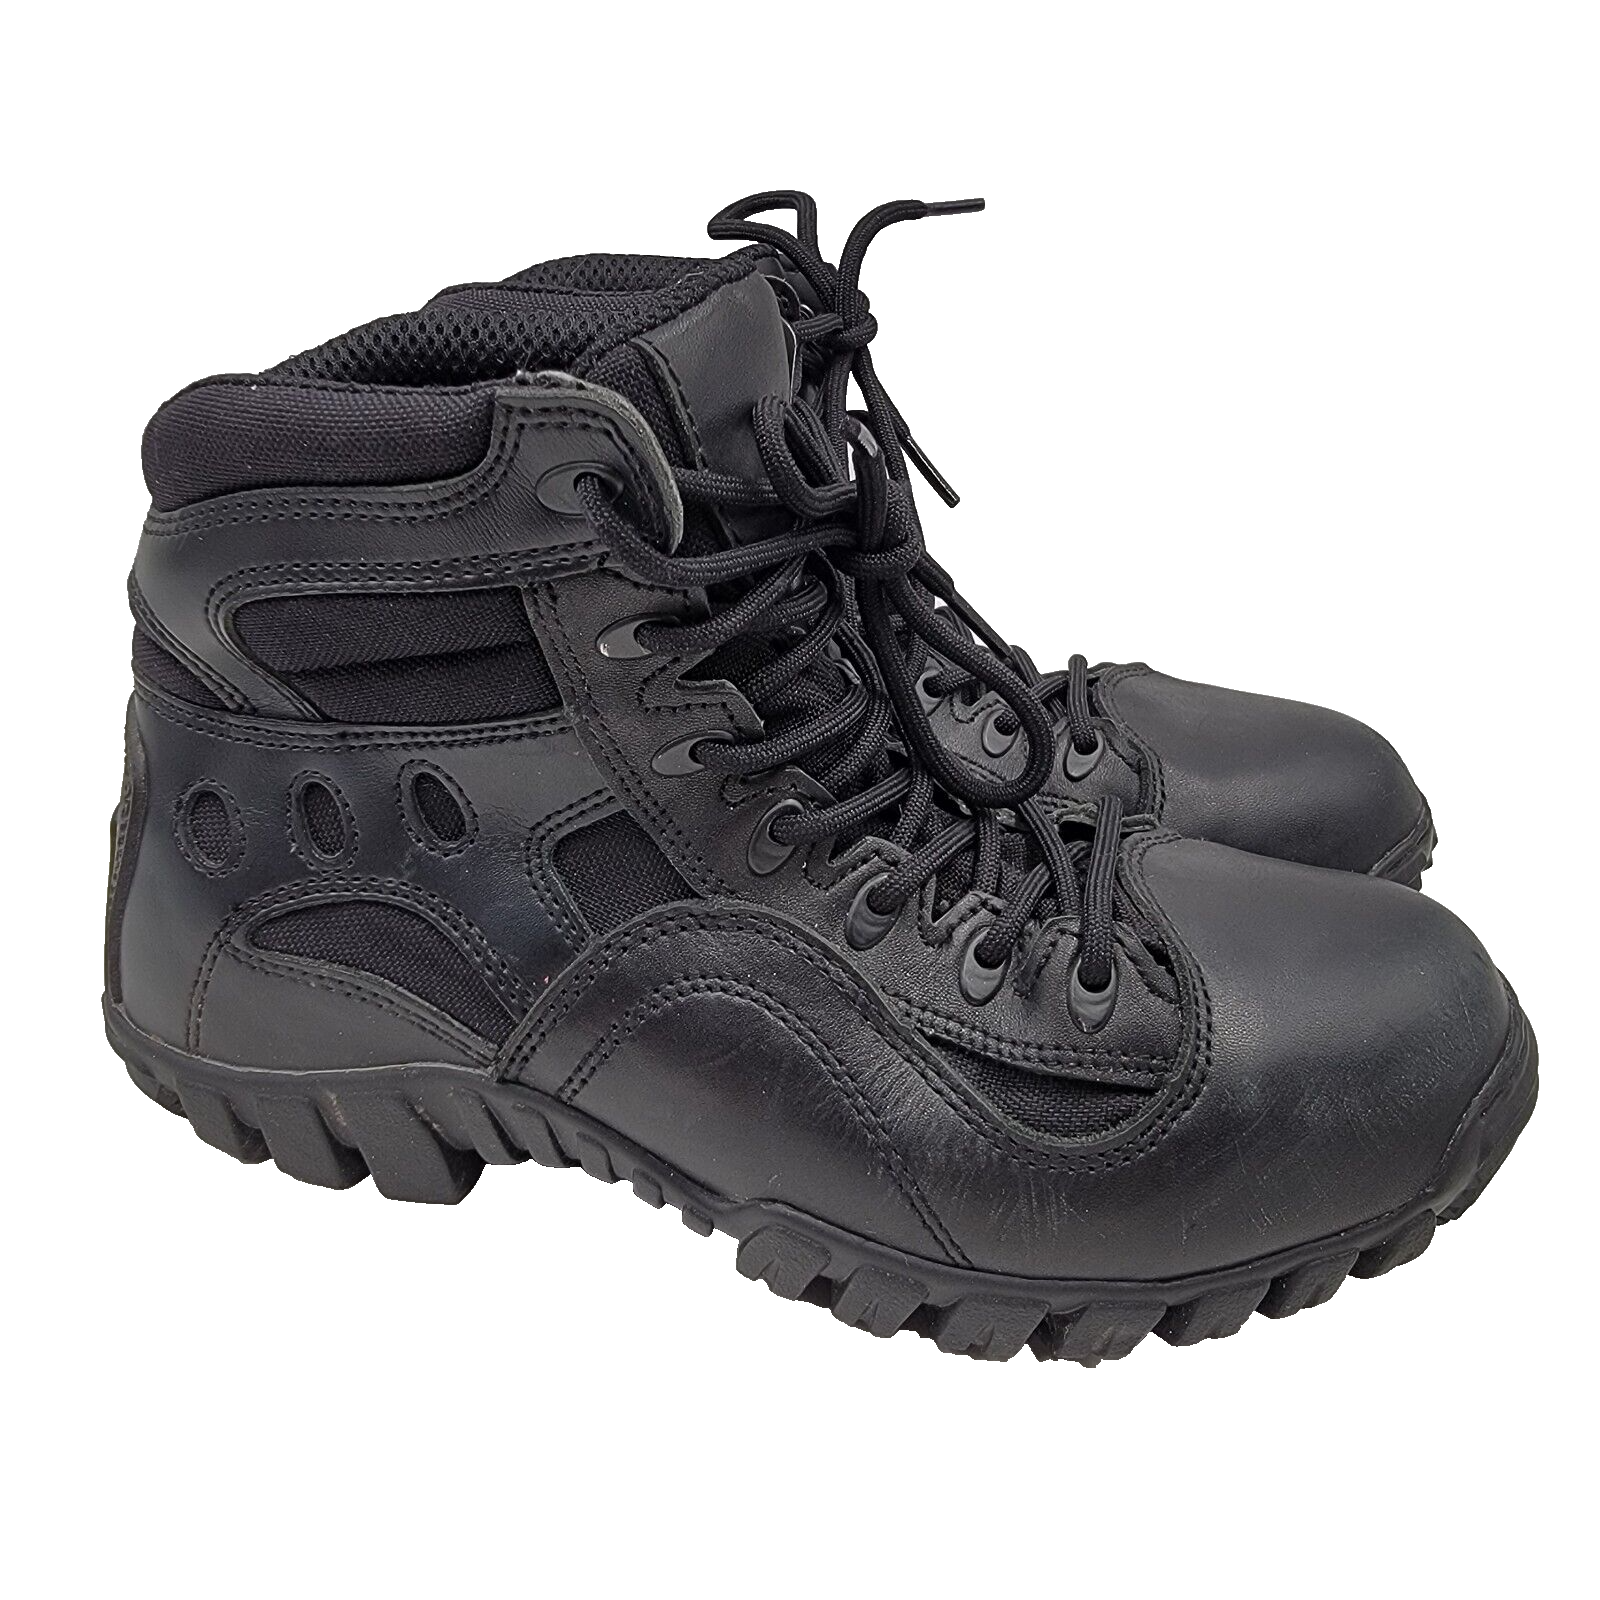 Primary image for Belleville Tactical Research Mens Boots 8 Black Leather Combat Utility Military